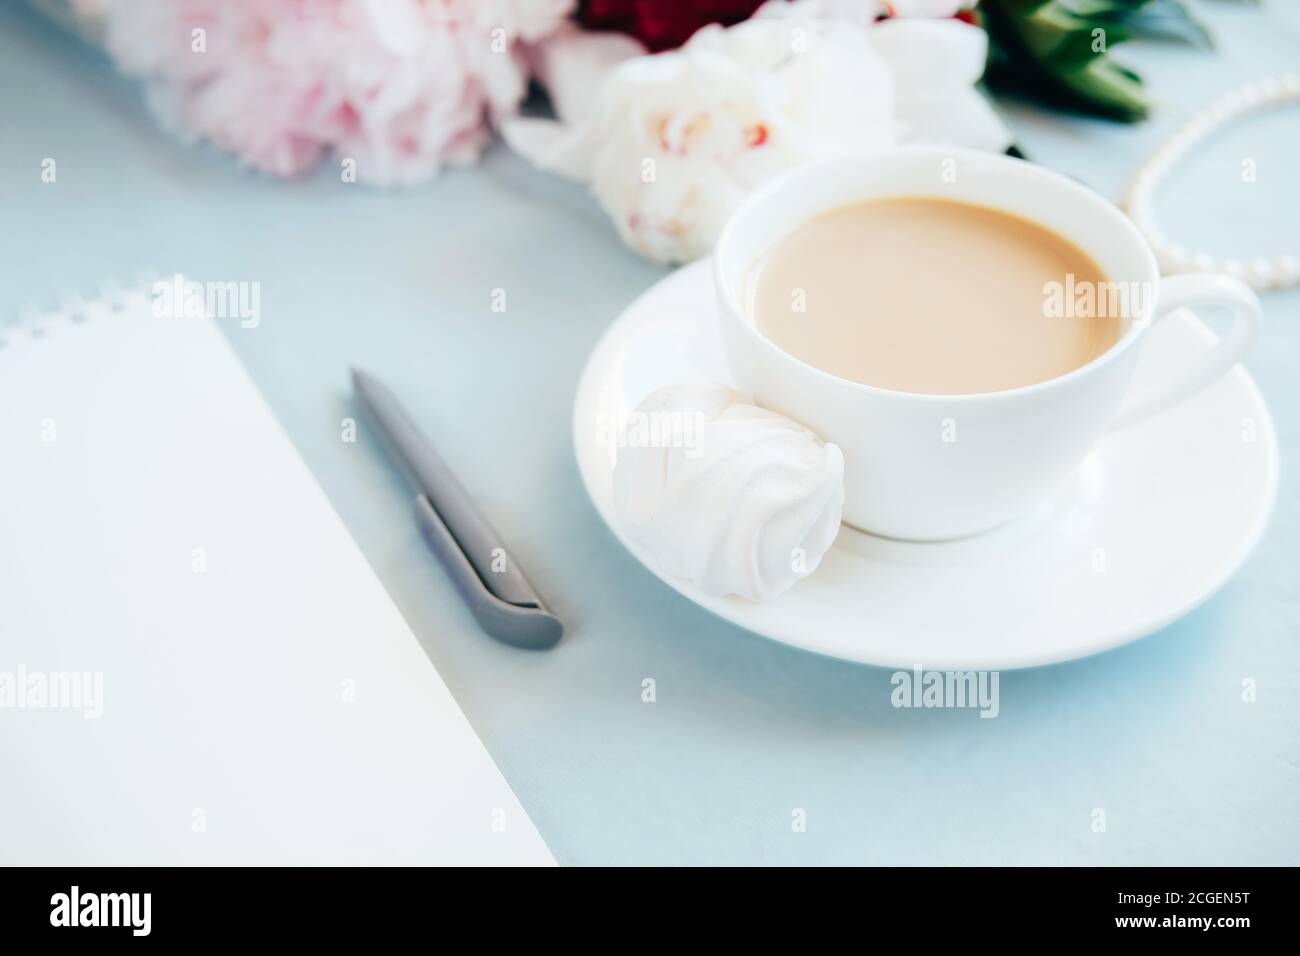 Blank notebook, pen and cup of coffee on the table. Stock Photo